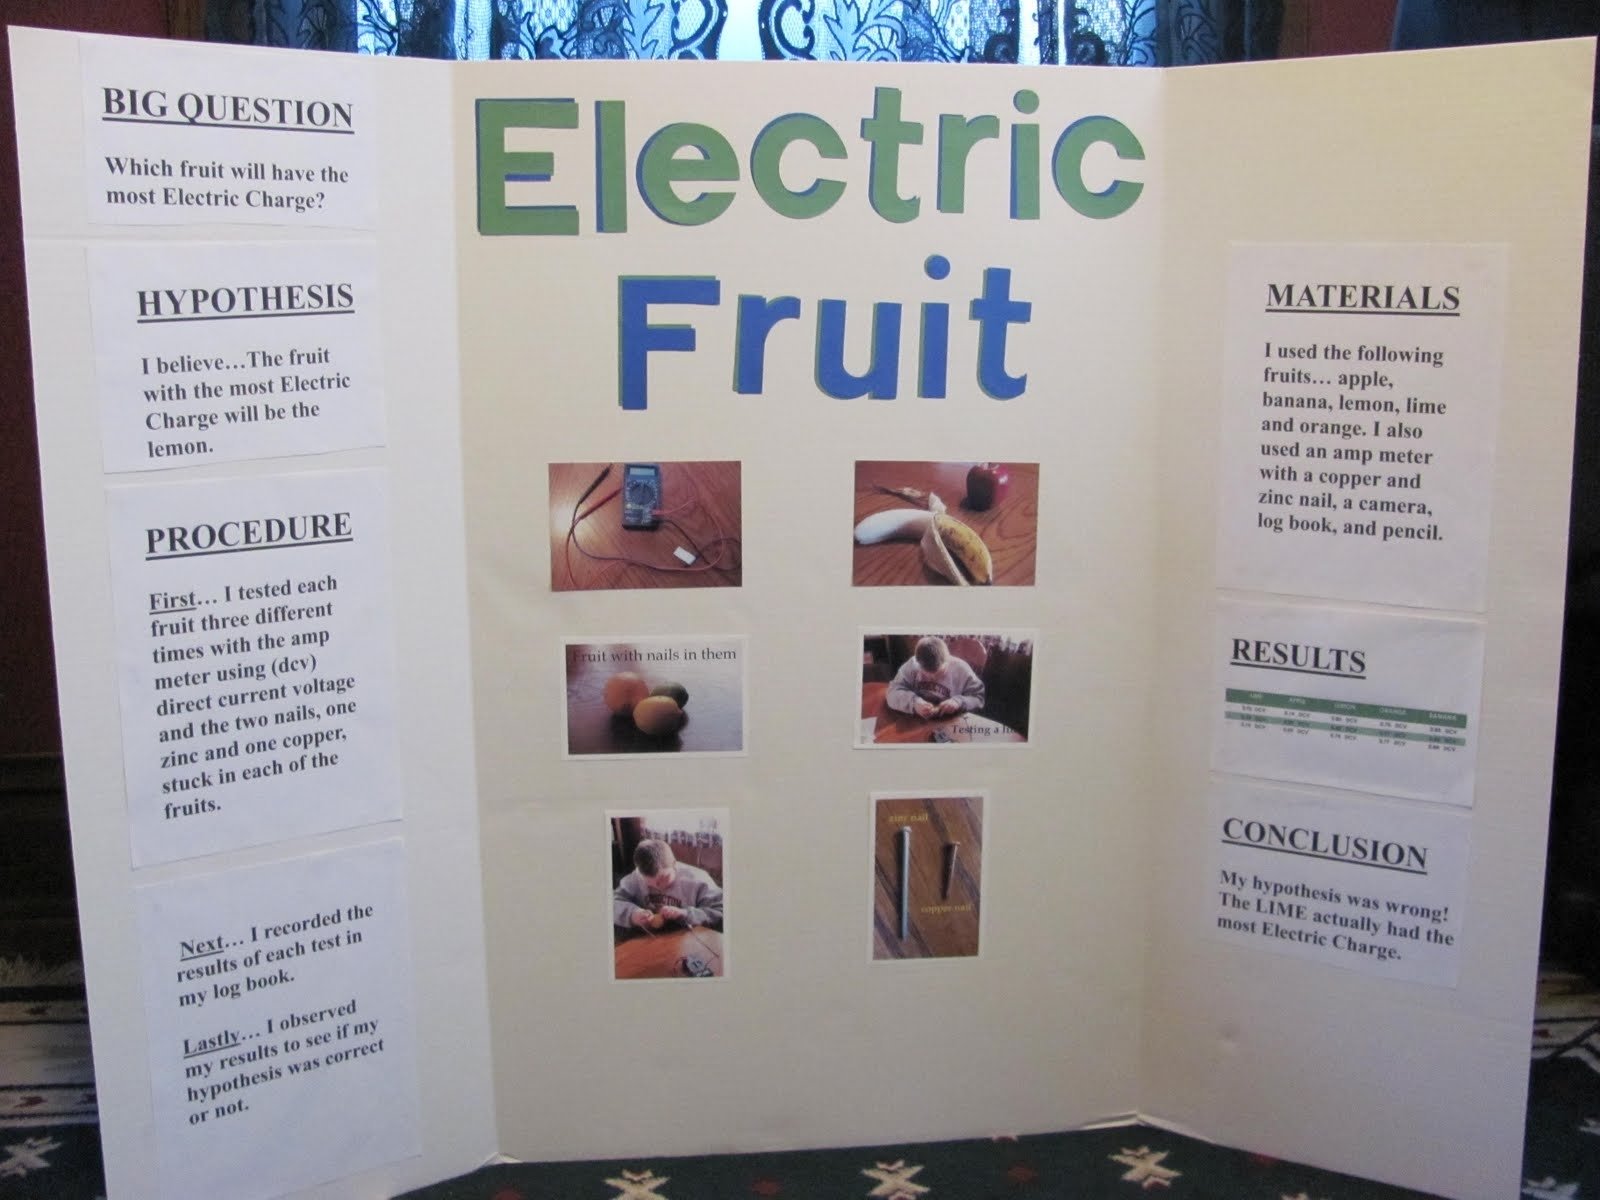 10 Attractive 6Th Grade Science Projects Ideas science fair projects he estimated the lemon would but actually 11 2022